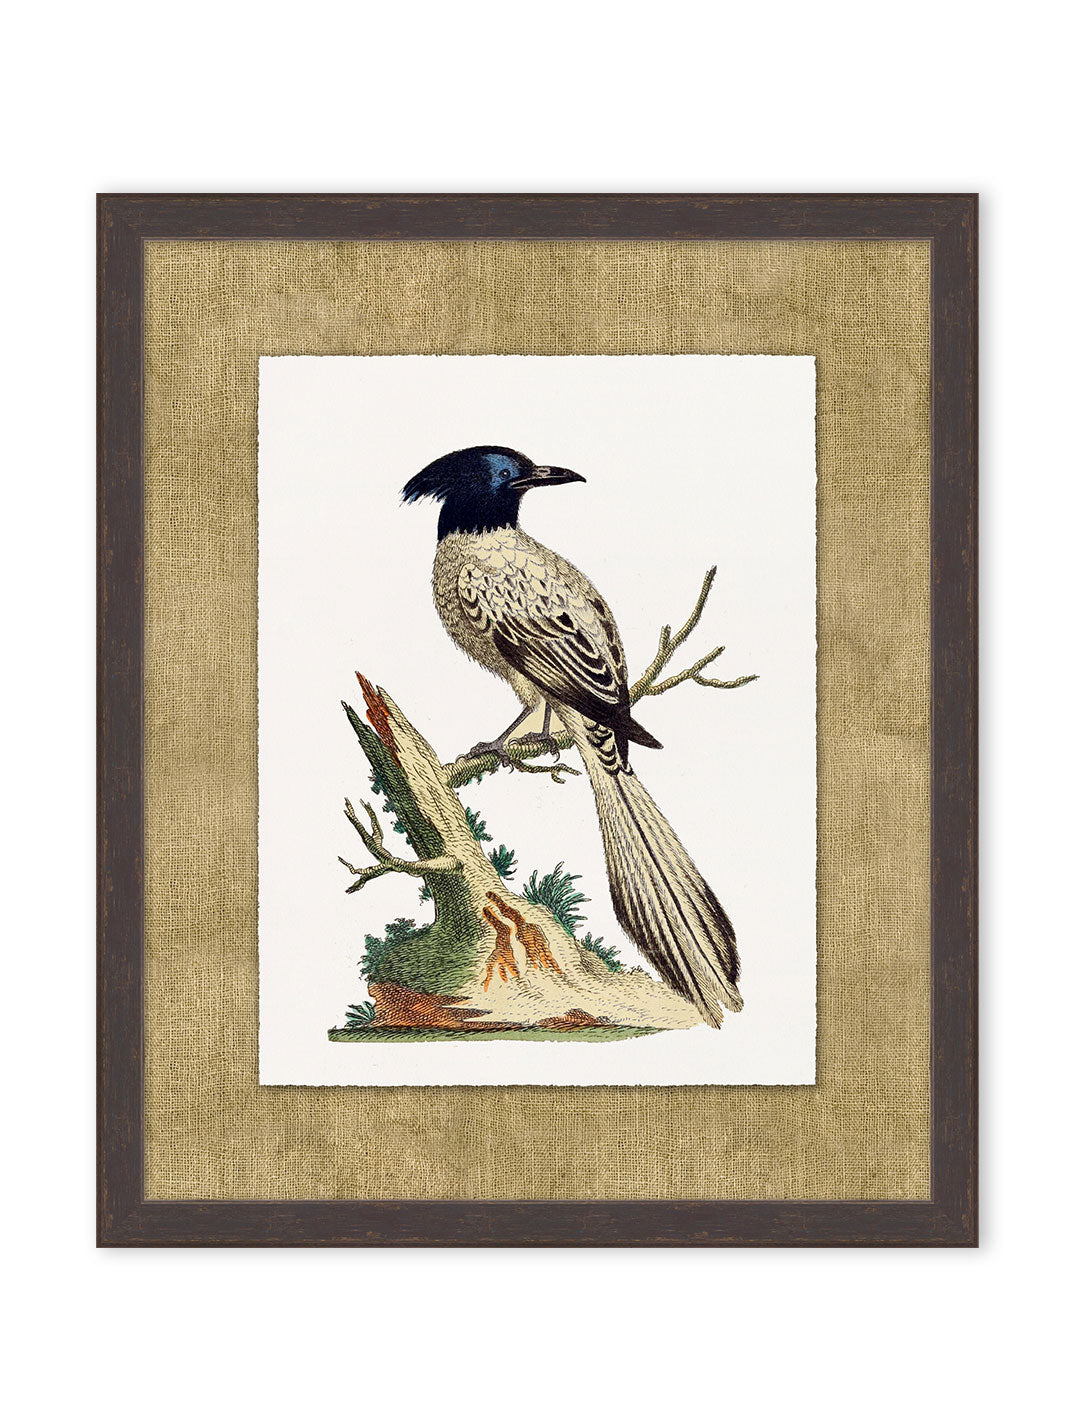 'Woodland Perch 4' by Nathan Turner Framed Art